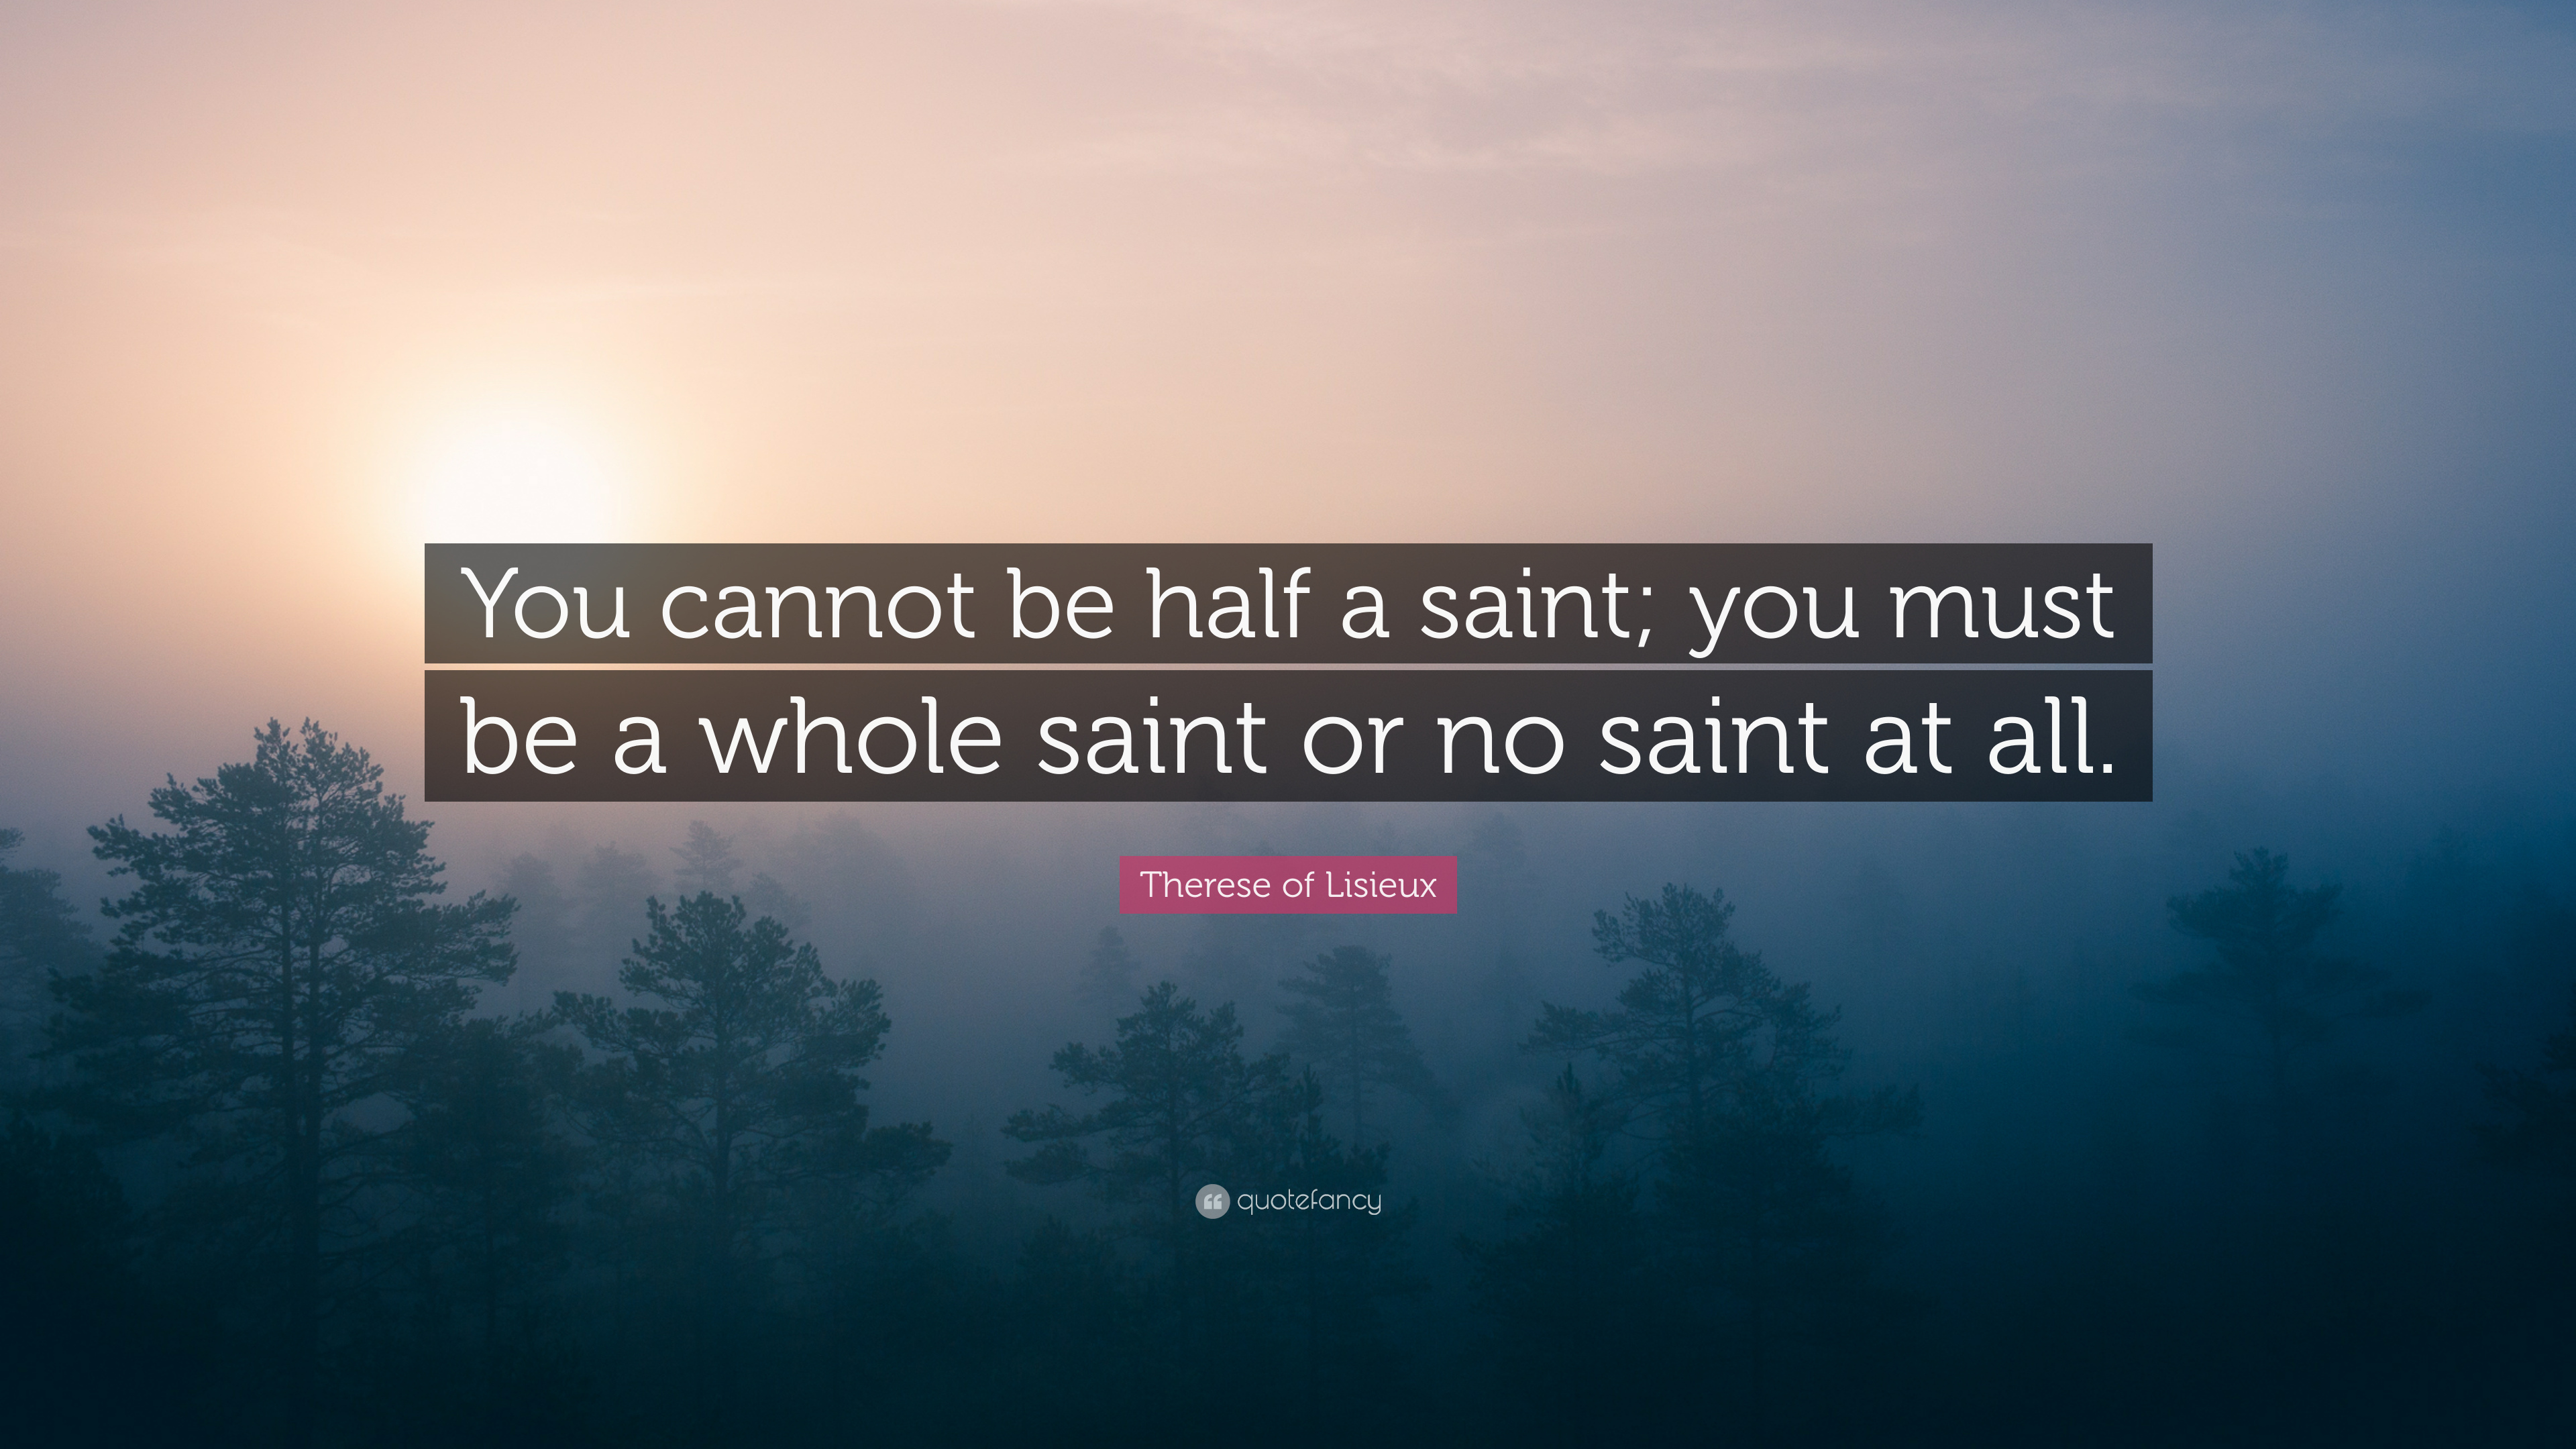 Therese of Lisieux Quote: “You cannot be half a saint; you